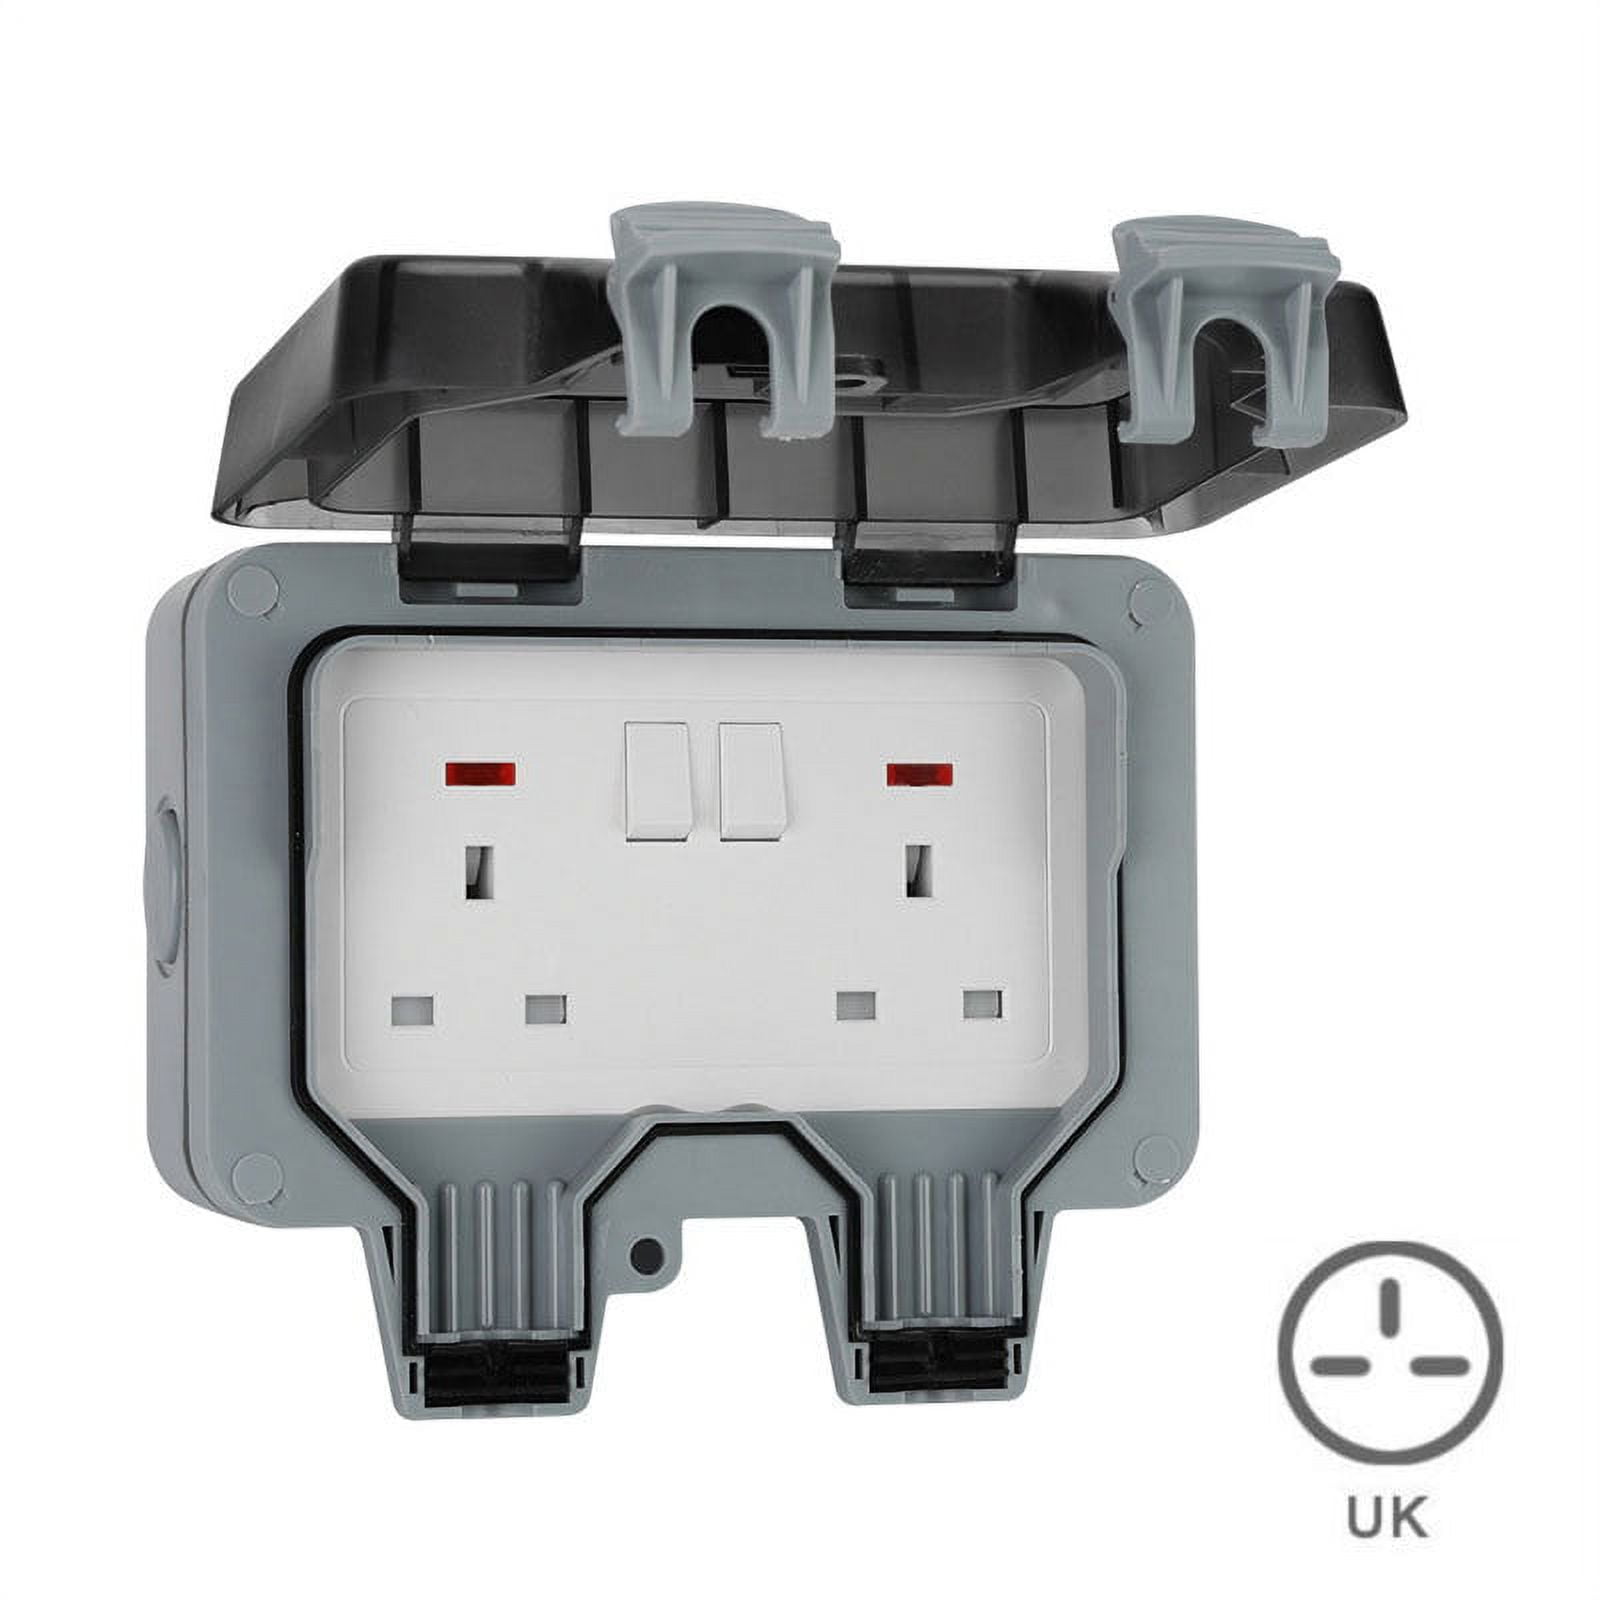 SNAP INVENT Smart Plug Waterproof Outdoor Electrical Outlets with Alexa,  Google Assistant- 4 Sockets 